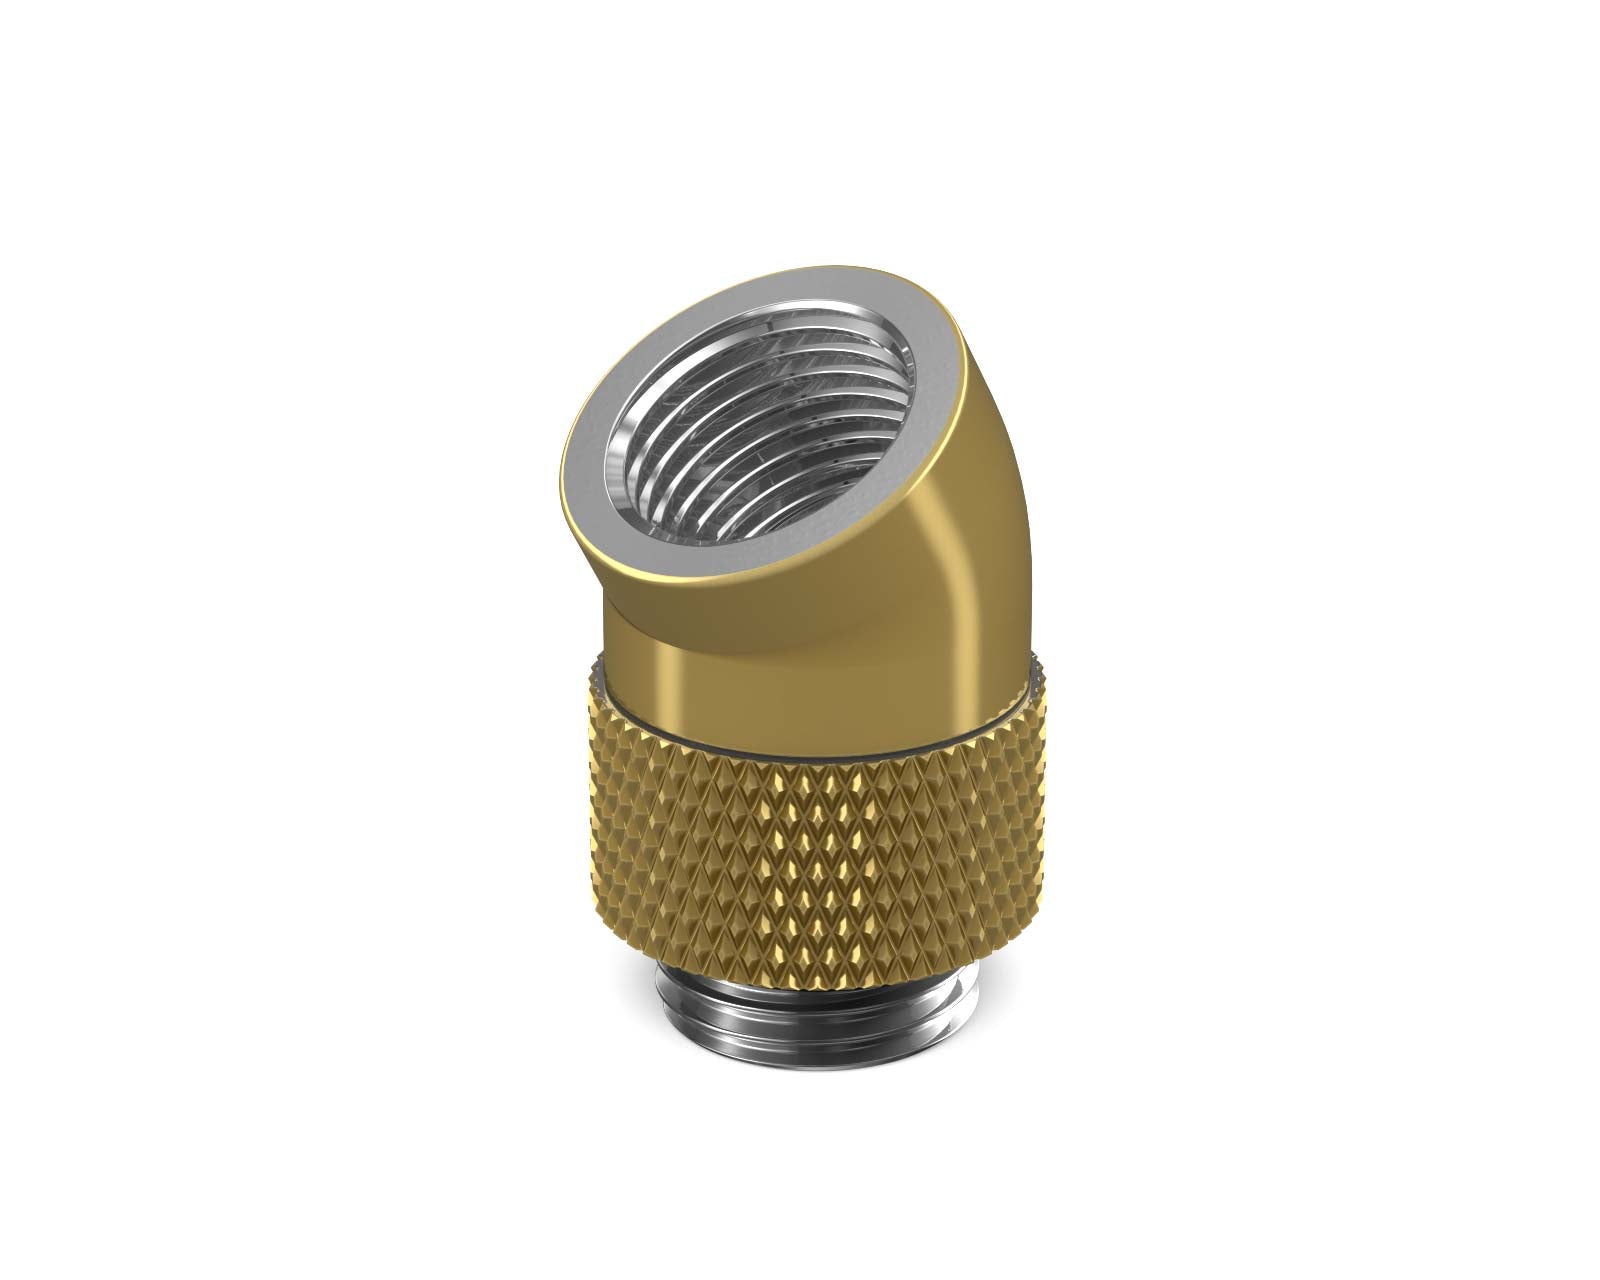 BSTOCK:PrimoChill Male to Female G 1/4in. 30 Degree SX Rotary Elbow Fitting - Candy Gold